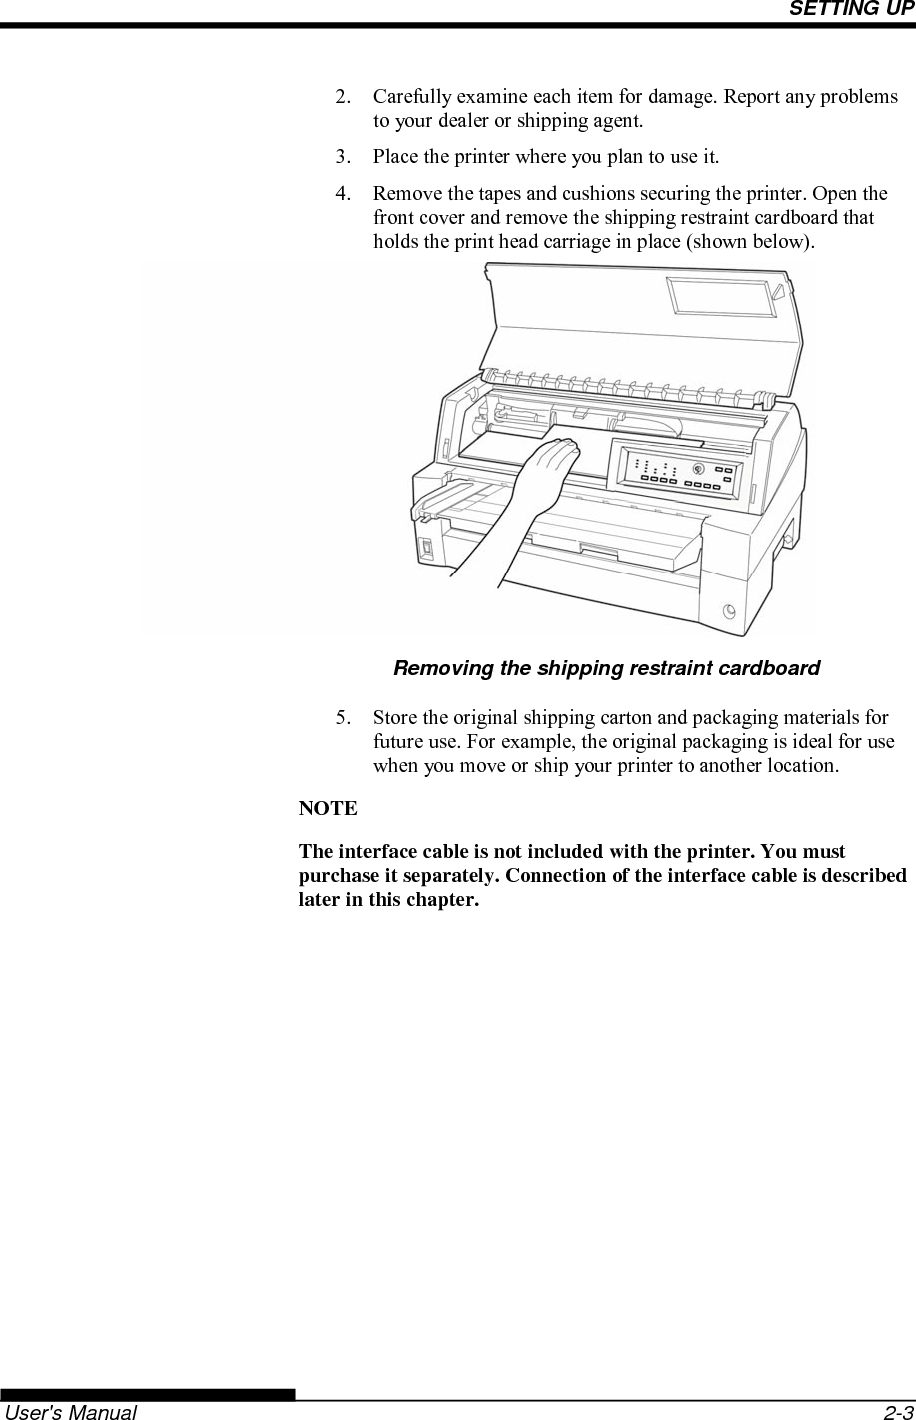 SETTING UP   User&apos;s Manual  2-3 2.  Carefully examine each item for damage. Report any problems to your dealer or shipping agent. 3.  Place the printer where you plan to use it. 4.  Remove the tapes and cushions securing the printer. Open the front cover and remove the shipping restraint cardboard that holds the print head carriage in place (shown below).           Removing the shipping restraint cardboard 5.  Store the original shipping carton and packaging materials for future use. For example, the original packaging is ideal for use when you move or ship your printer to another location. NOTE The interface cable is not included with the printer. You must purchase it separately. Connection of the interface cable is described later in this chapter.  